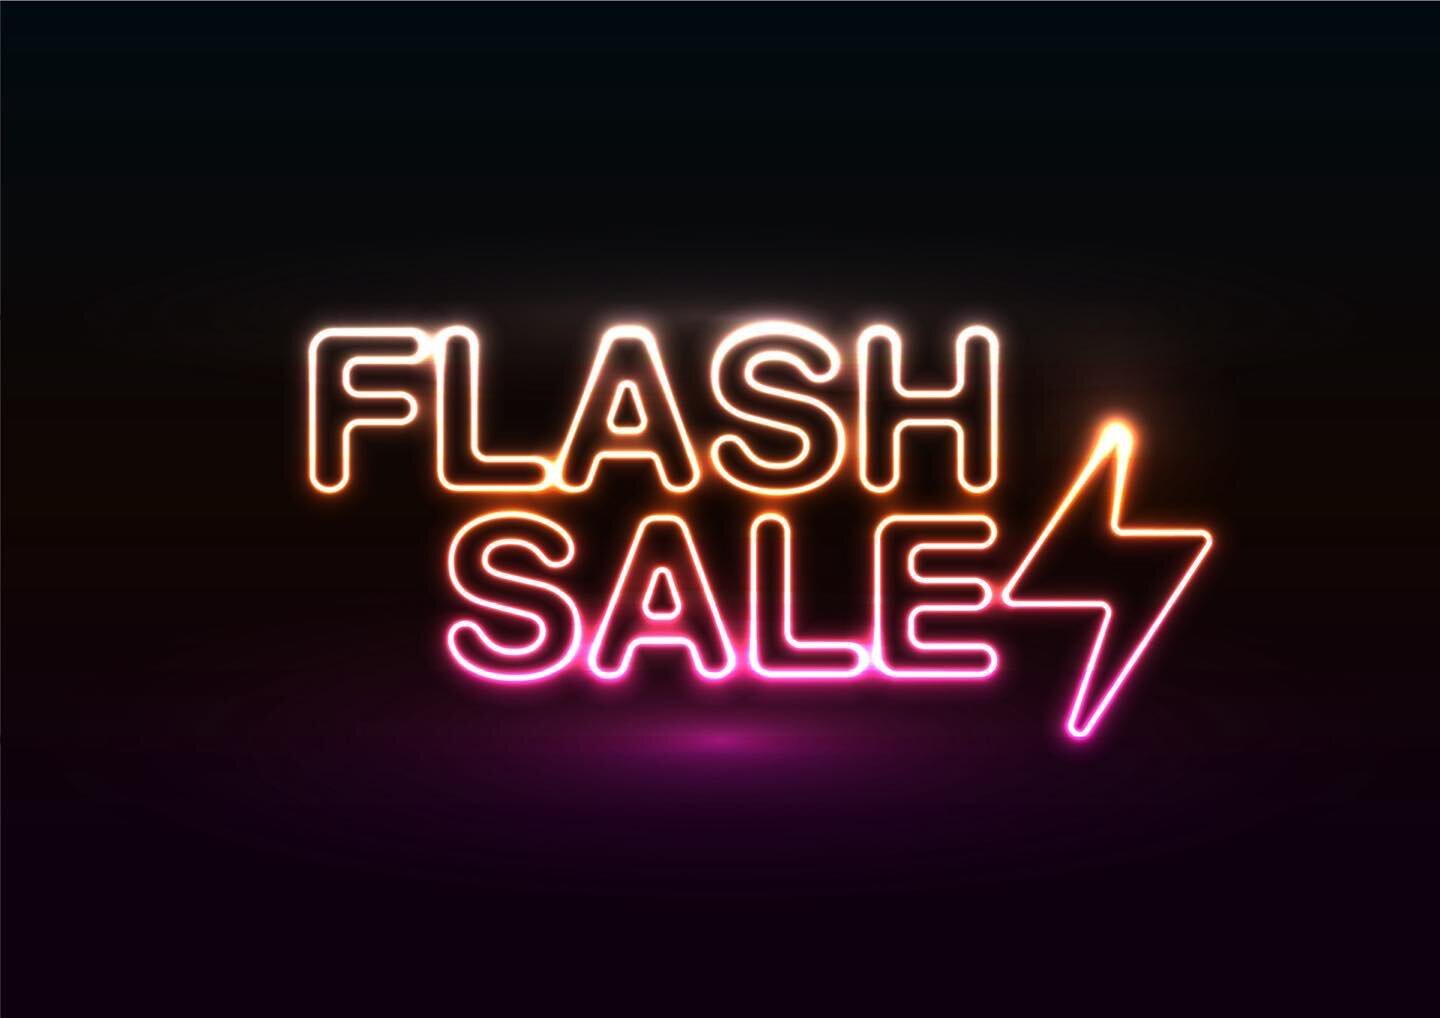 Flash sale! This week only! Deals on all 2023 bikes! Crazy prices on in stock e-bikes from GasGas, Husqvarna, Rocky and Cannondale! Discounts on all in stock 2023 bikes from Specialized, Kona, Rocky Mountain and more!